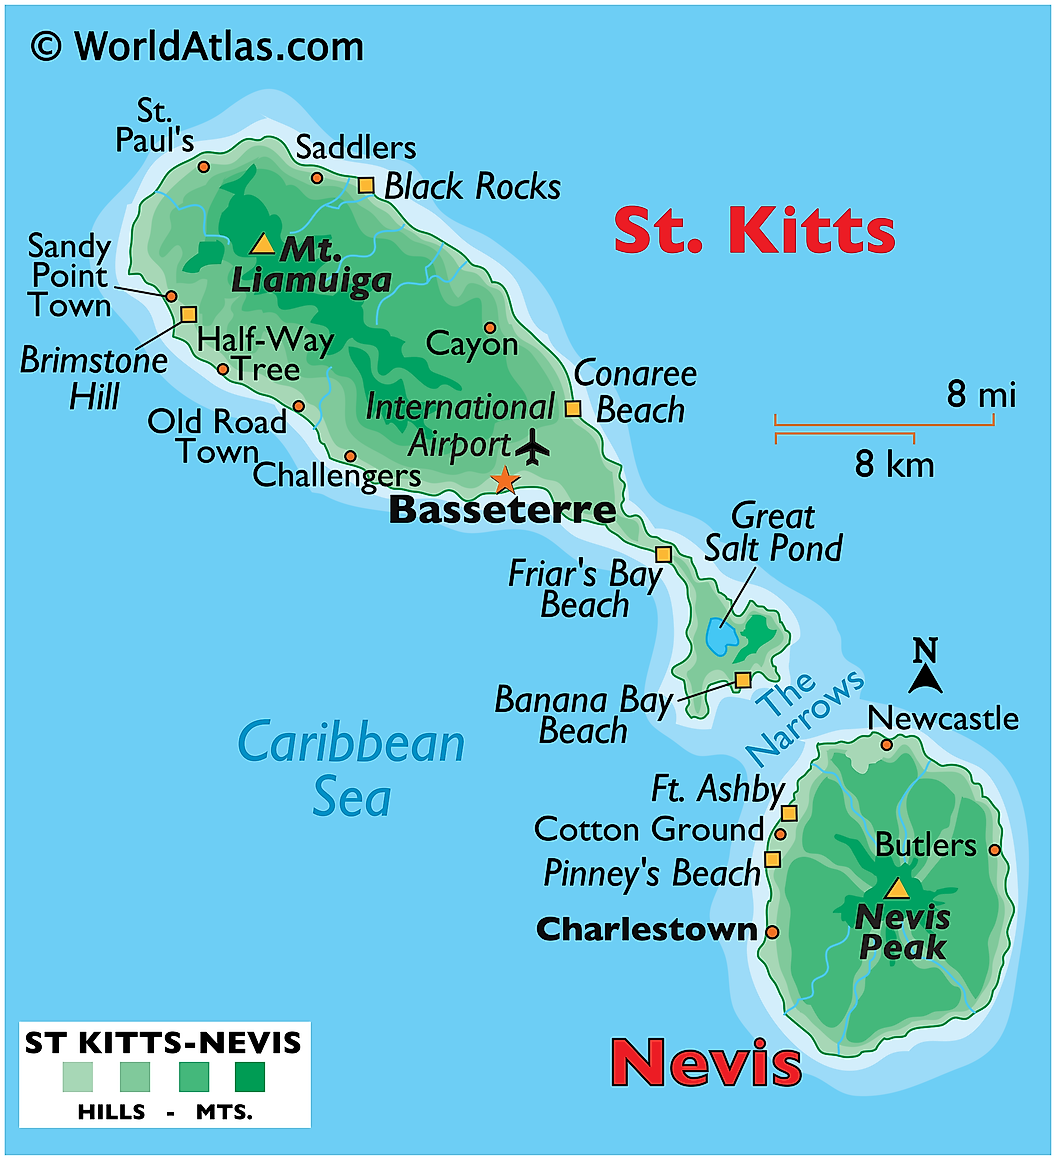 24103611 1 saint kitts and nevis map